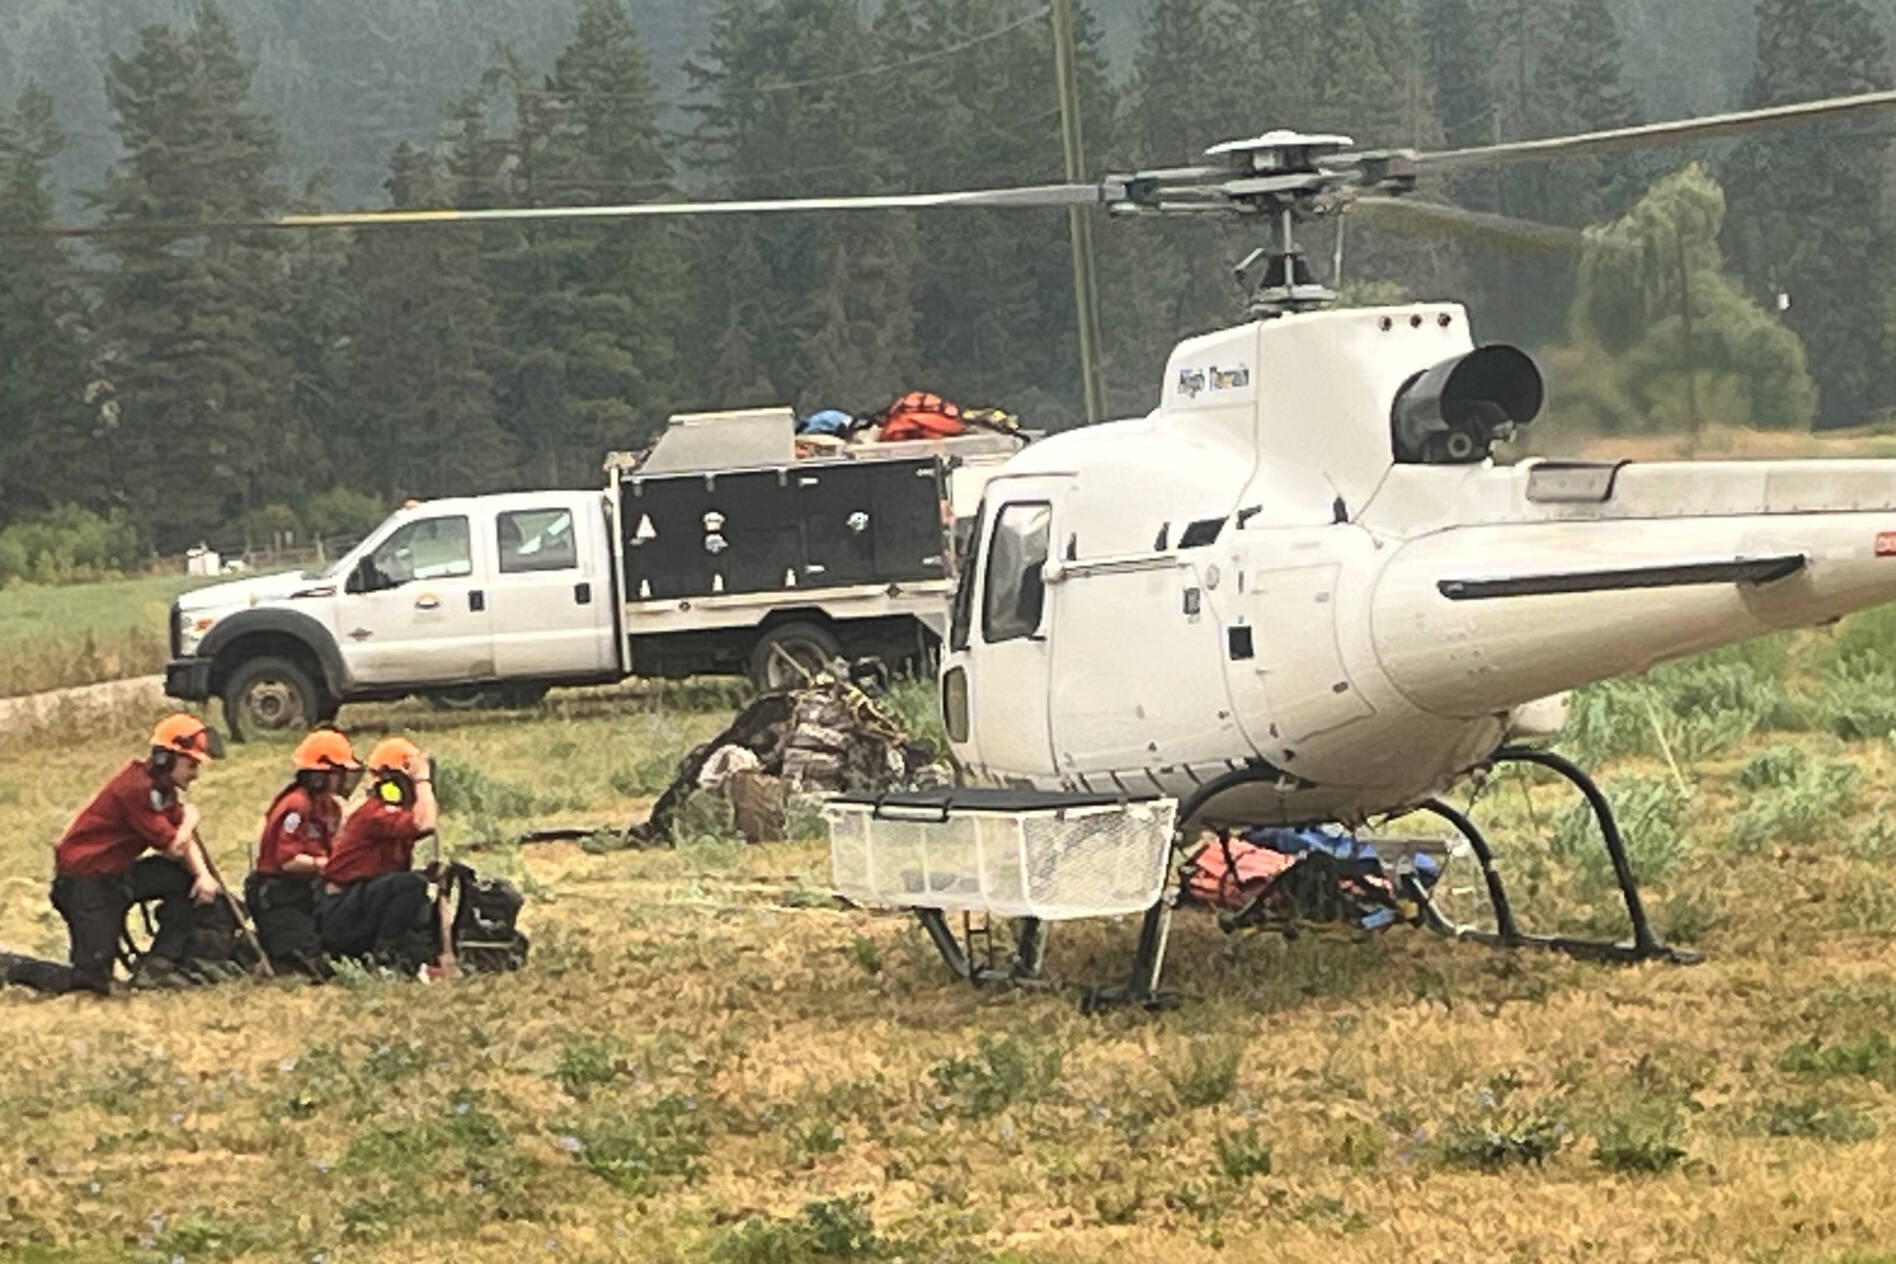 Firefighters needed to be shuttled by helicopter to the blaze burning in Spallumcheen in tough terrain. (Township of Spallumcheen photo)